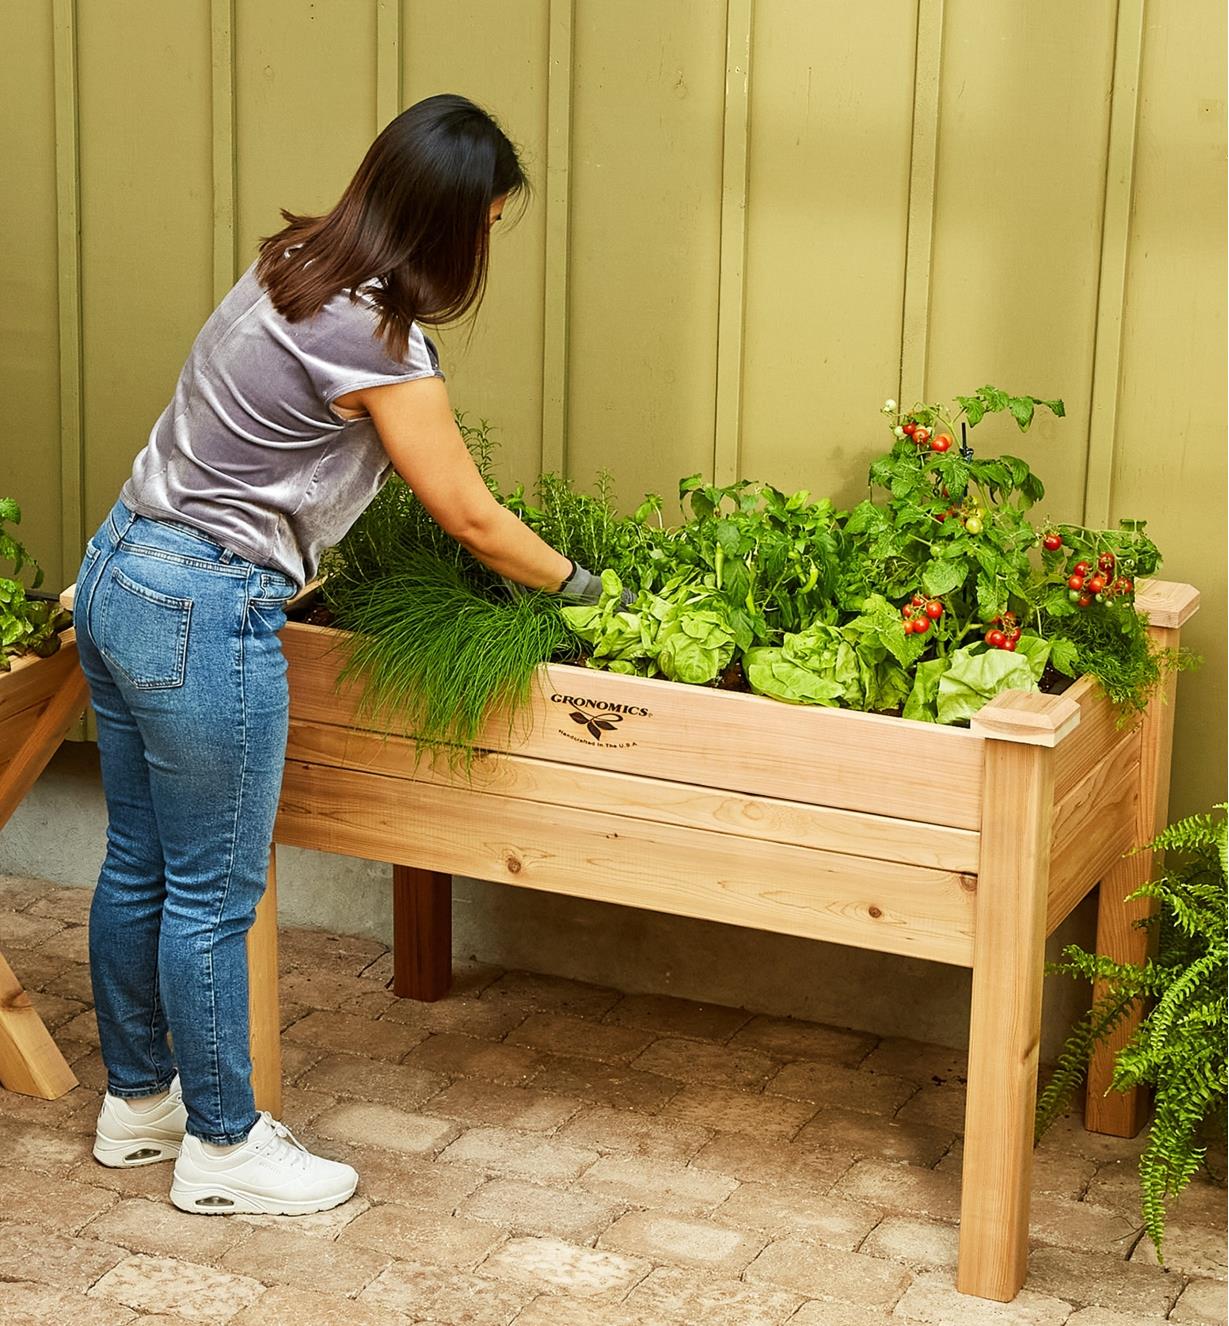 A gardener tends to vegetables growing in the elevated planter